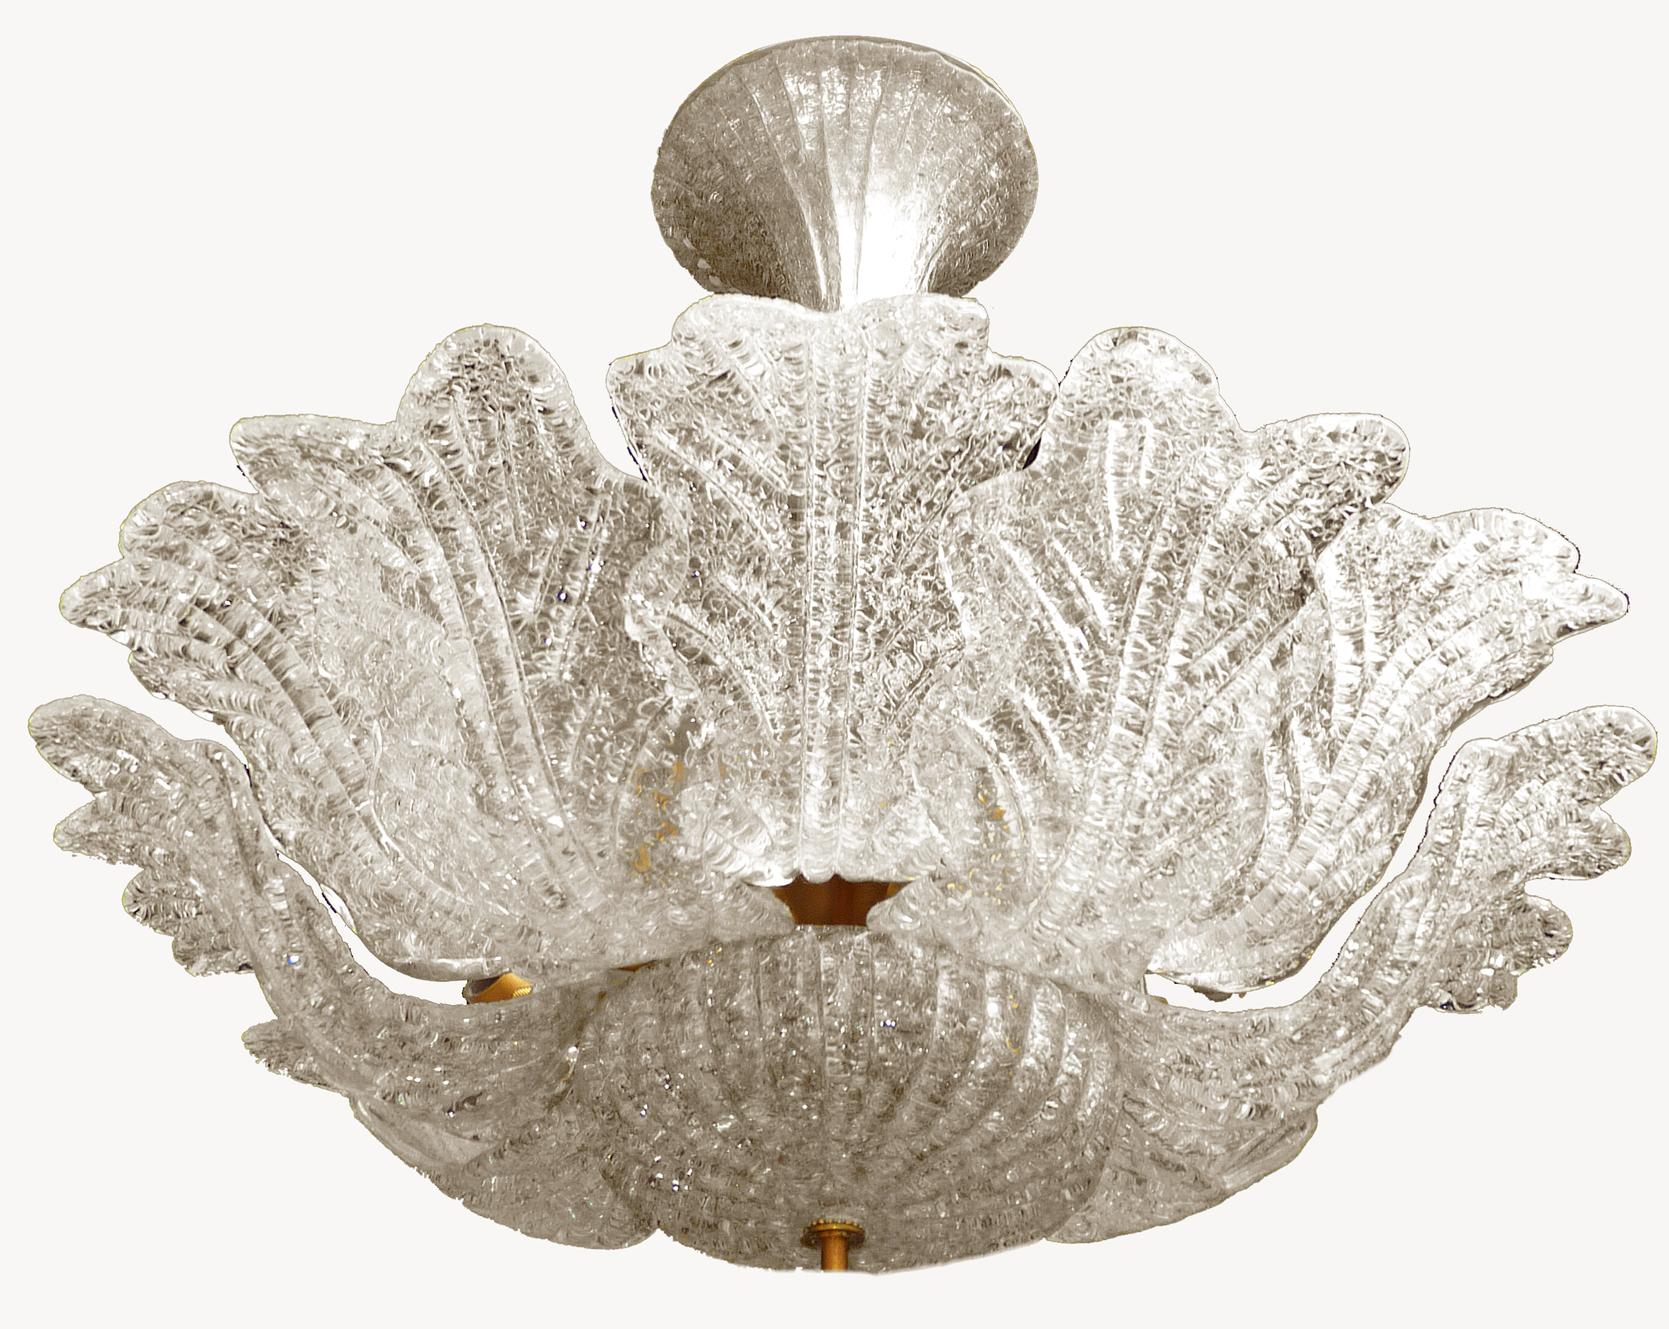 Gorgeous Italian Murano glass flush mount attributed to Barovier & Toso with hand blown textured glass
Measures:
Diameter 66 cm
Height 66 cm
Eight light bulbs E 14/ Good working condition.
Weight - 12 Kg/ 28 lb.
Assembly required. Bulbs not included.